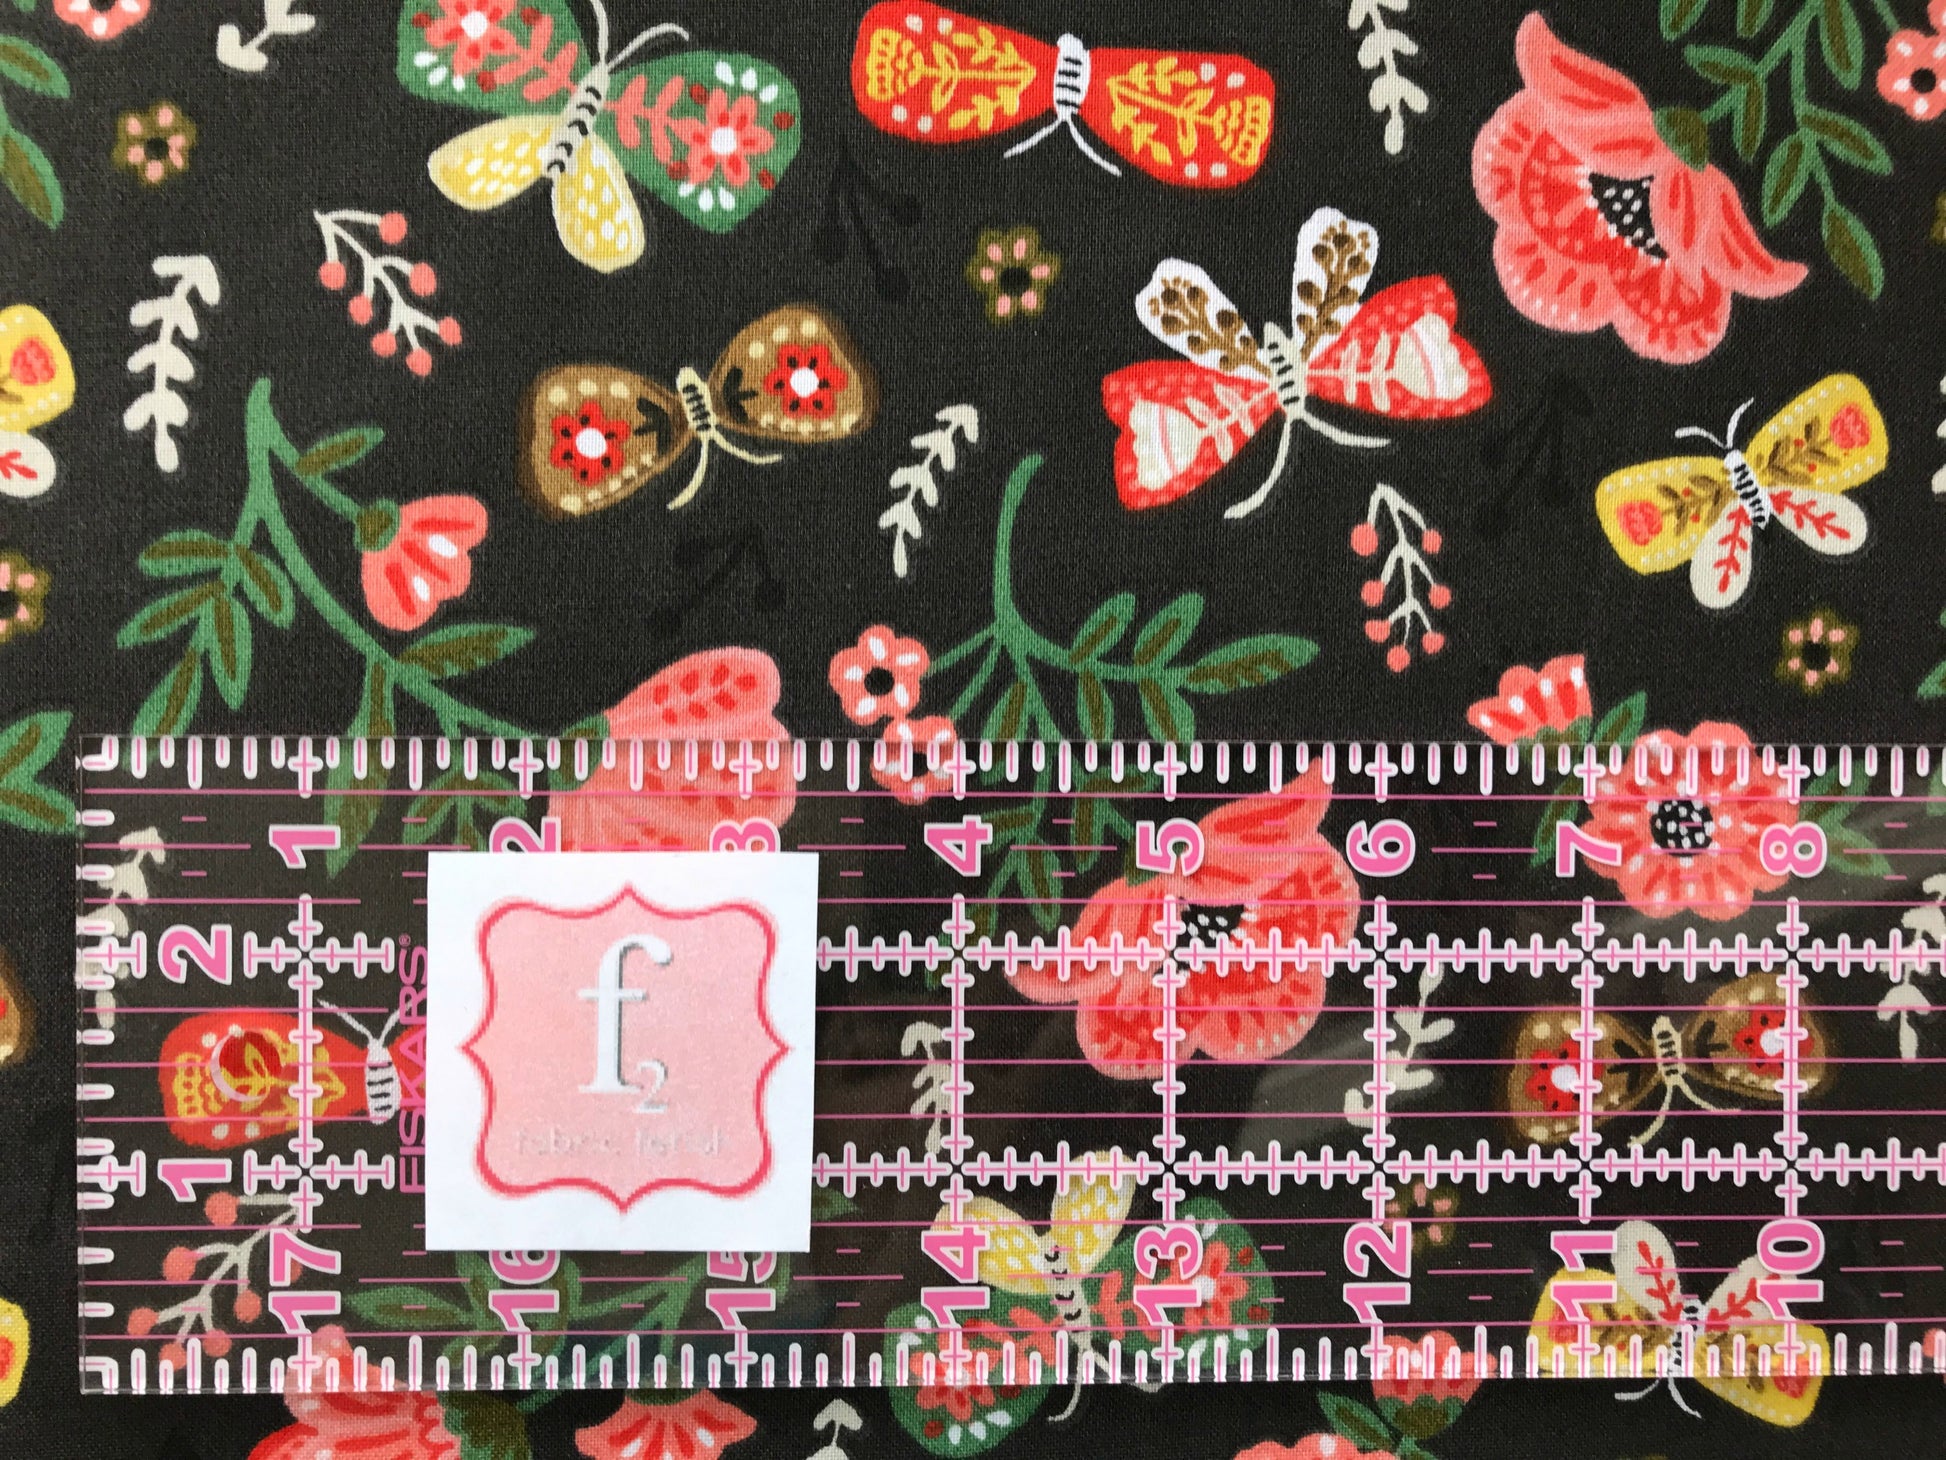 quilters palette glorious garden brown flowers butterflies Fabric Fetish